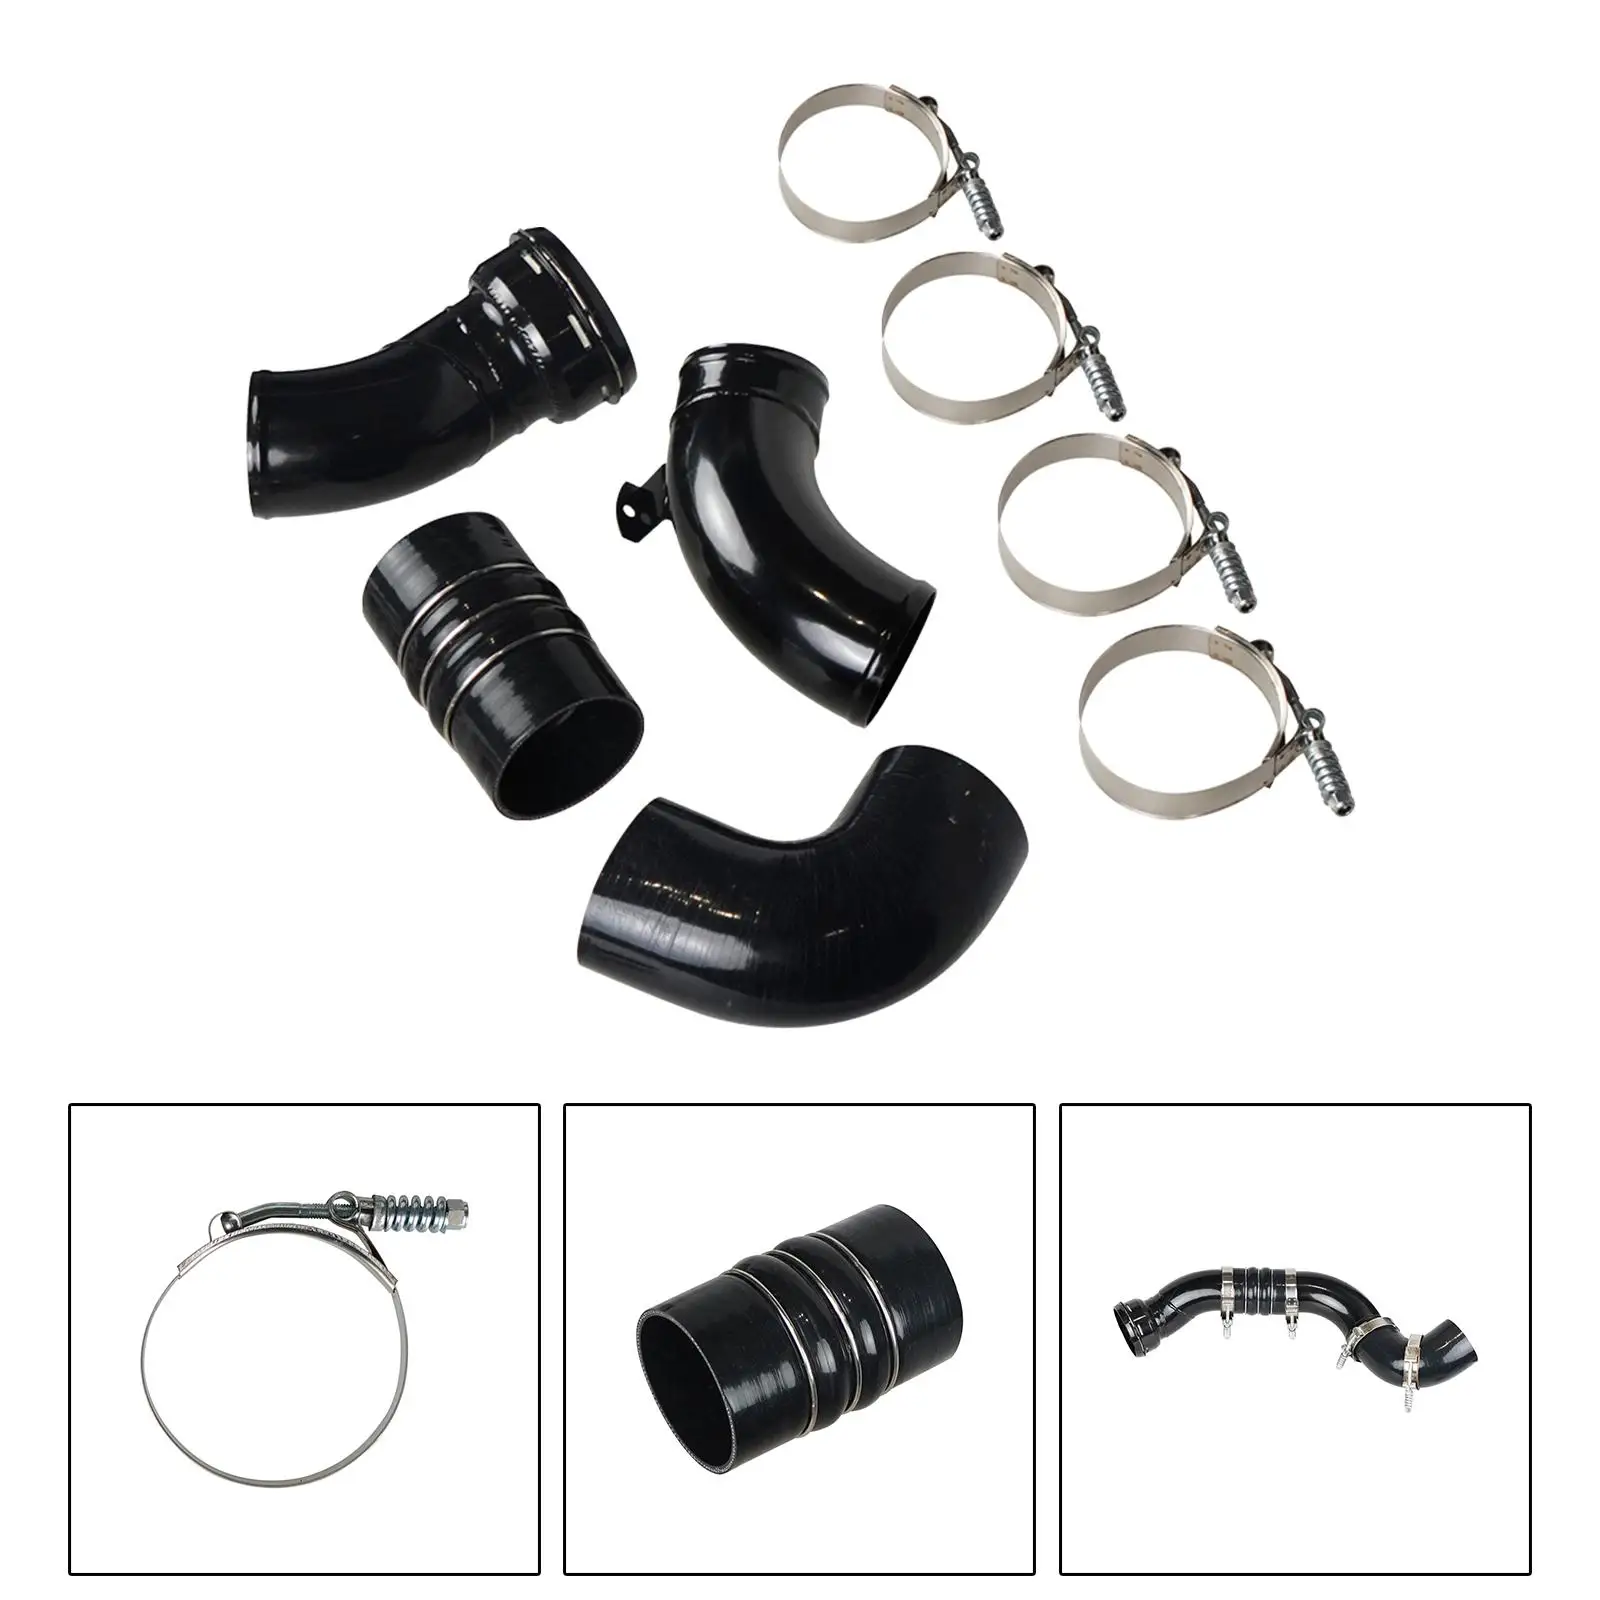 Cold Side Intercooler Pipe Kit 667-300 High Quality Durable Assembly Upgraded Turbo Intercooler Tube for Ford 6.7L 2011-16